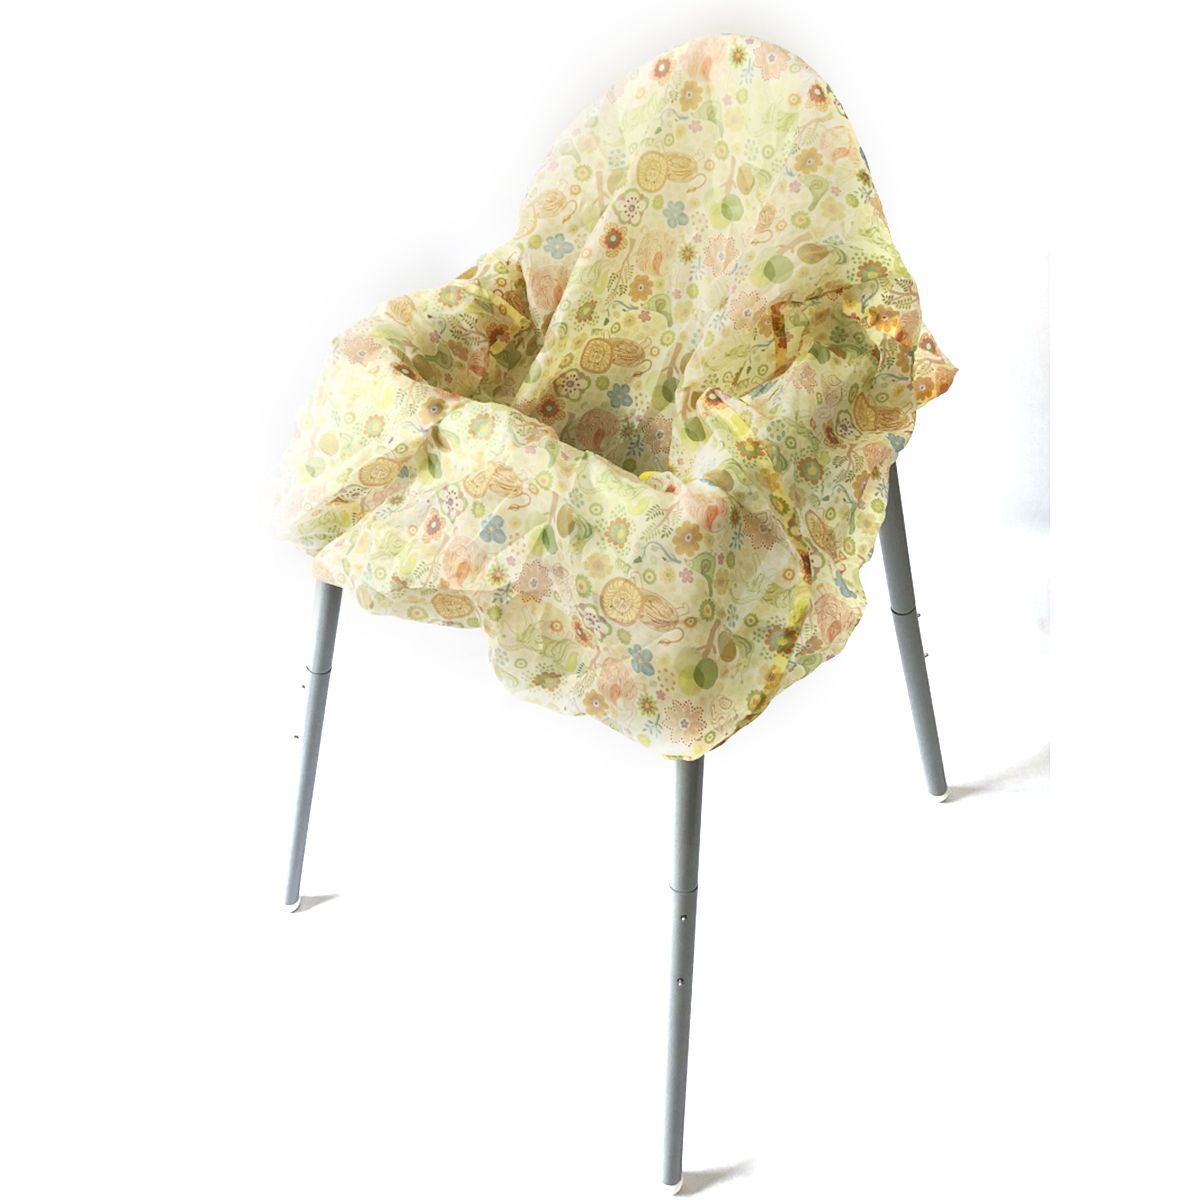 Infant-Baby-Kids-Shopping-Trolley-Cart-Seat-High-Chair-Cover-Protector-Foldable-1528169